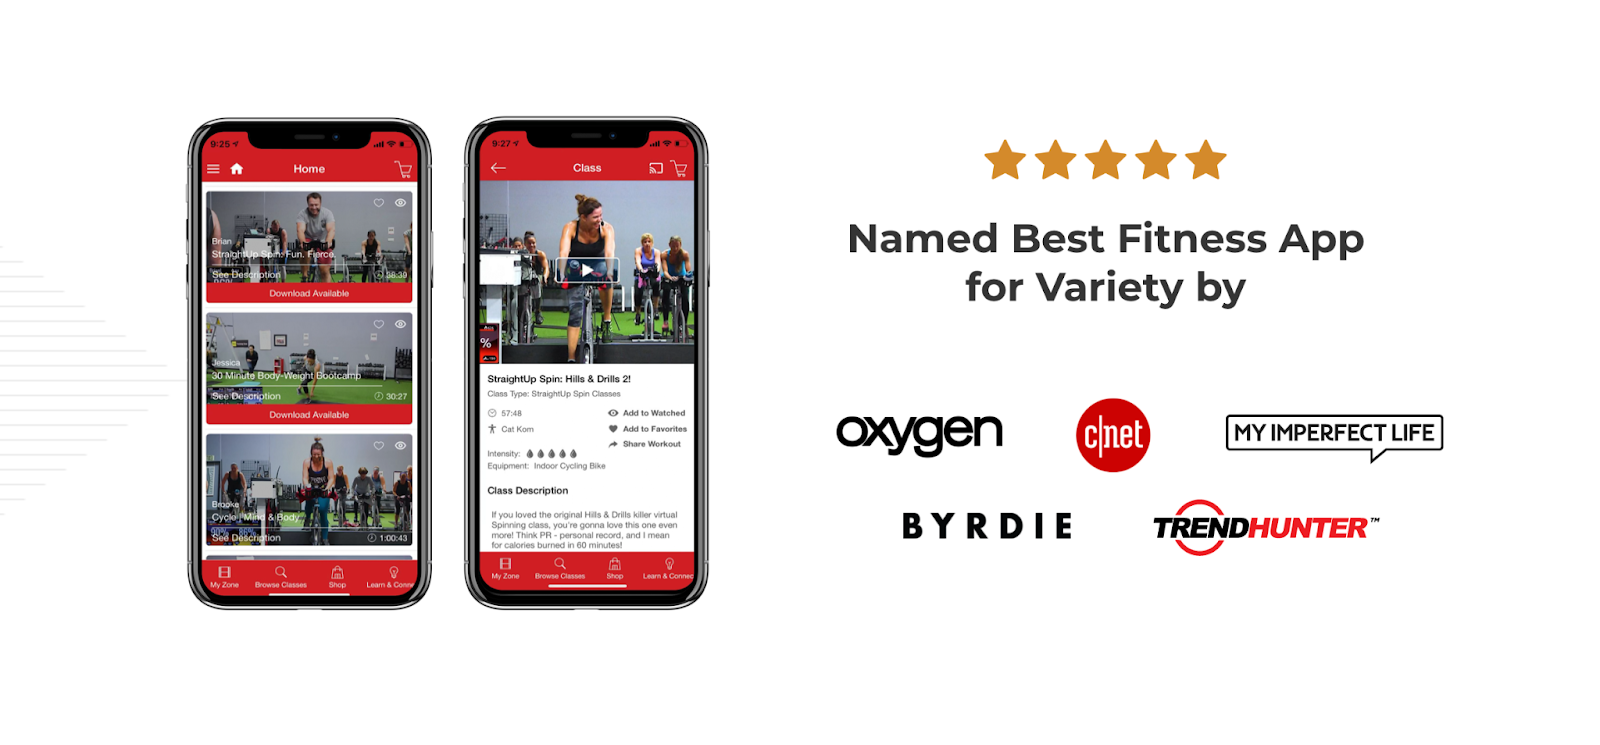 Designed image of Studio SWEAT onDemand as Best Fitness App for Variety